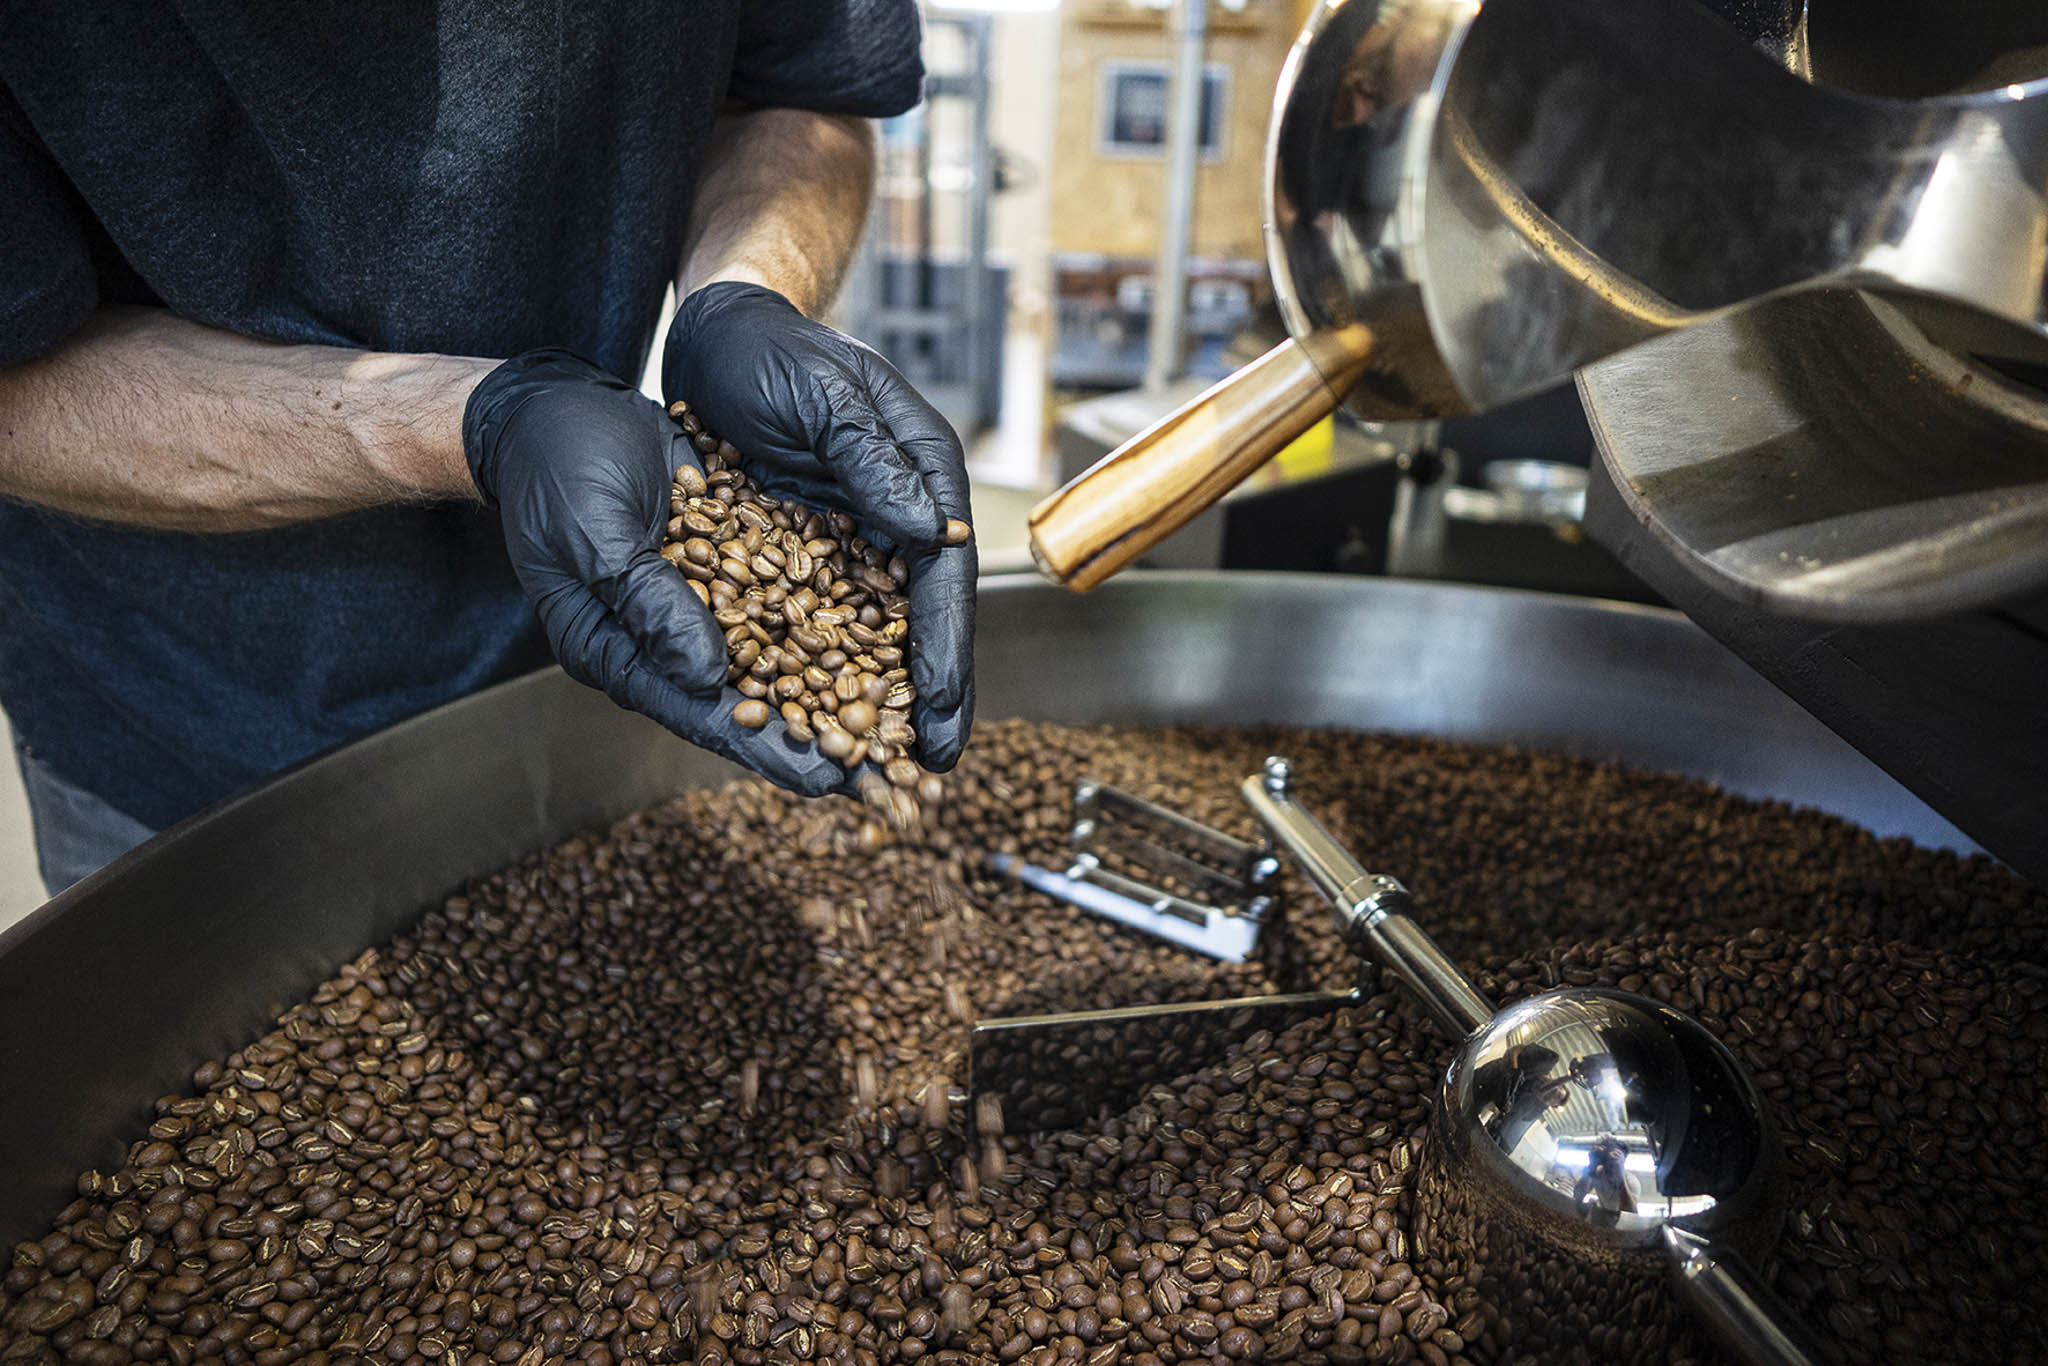 Load video: There Salzburg coffee roastery